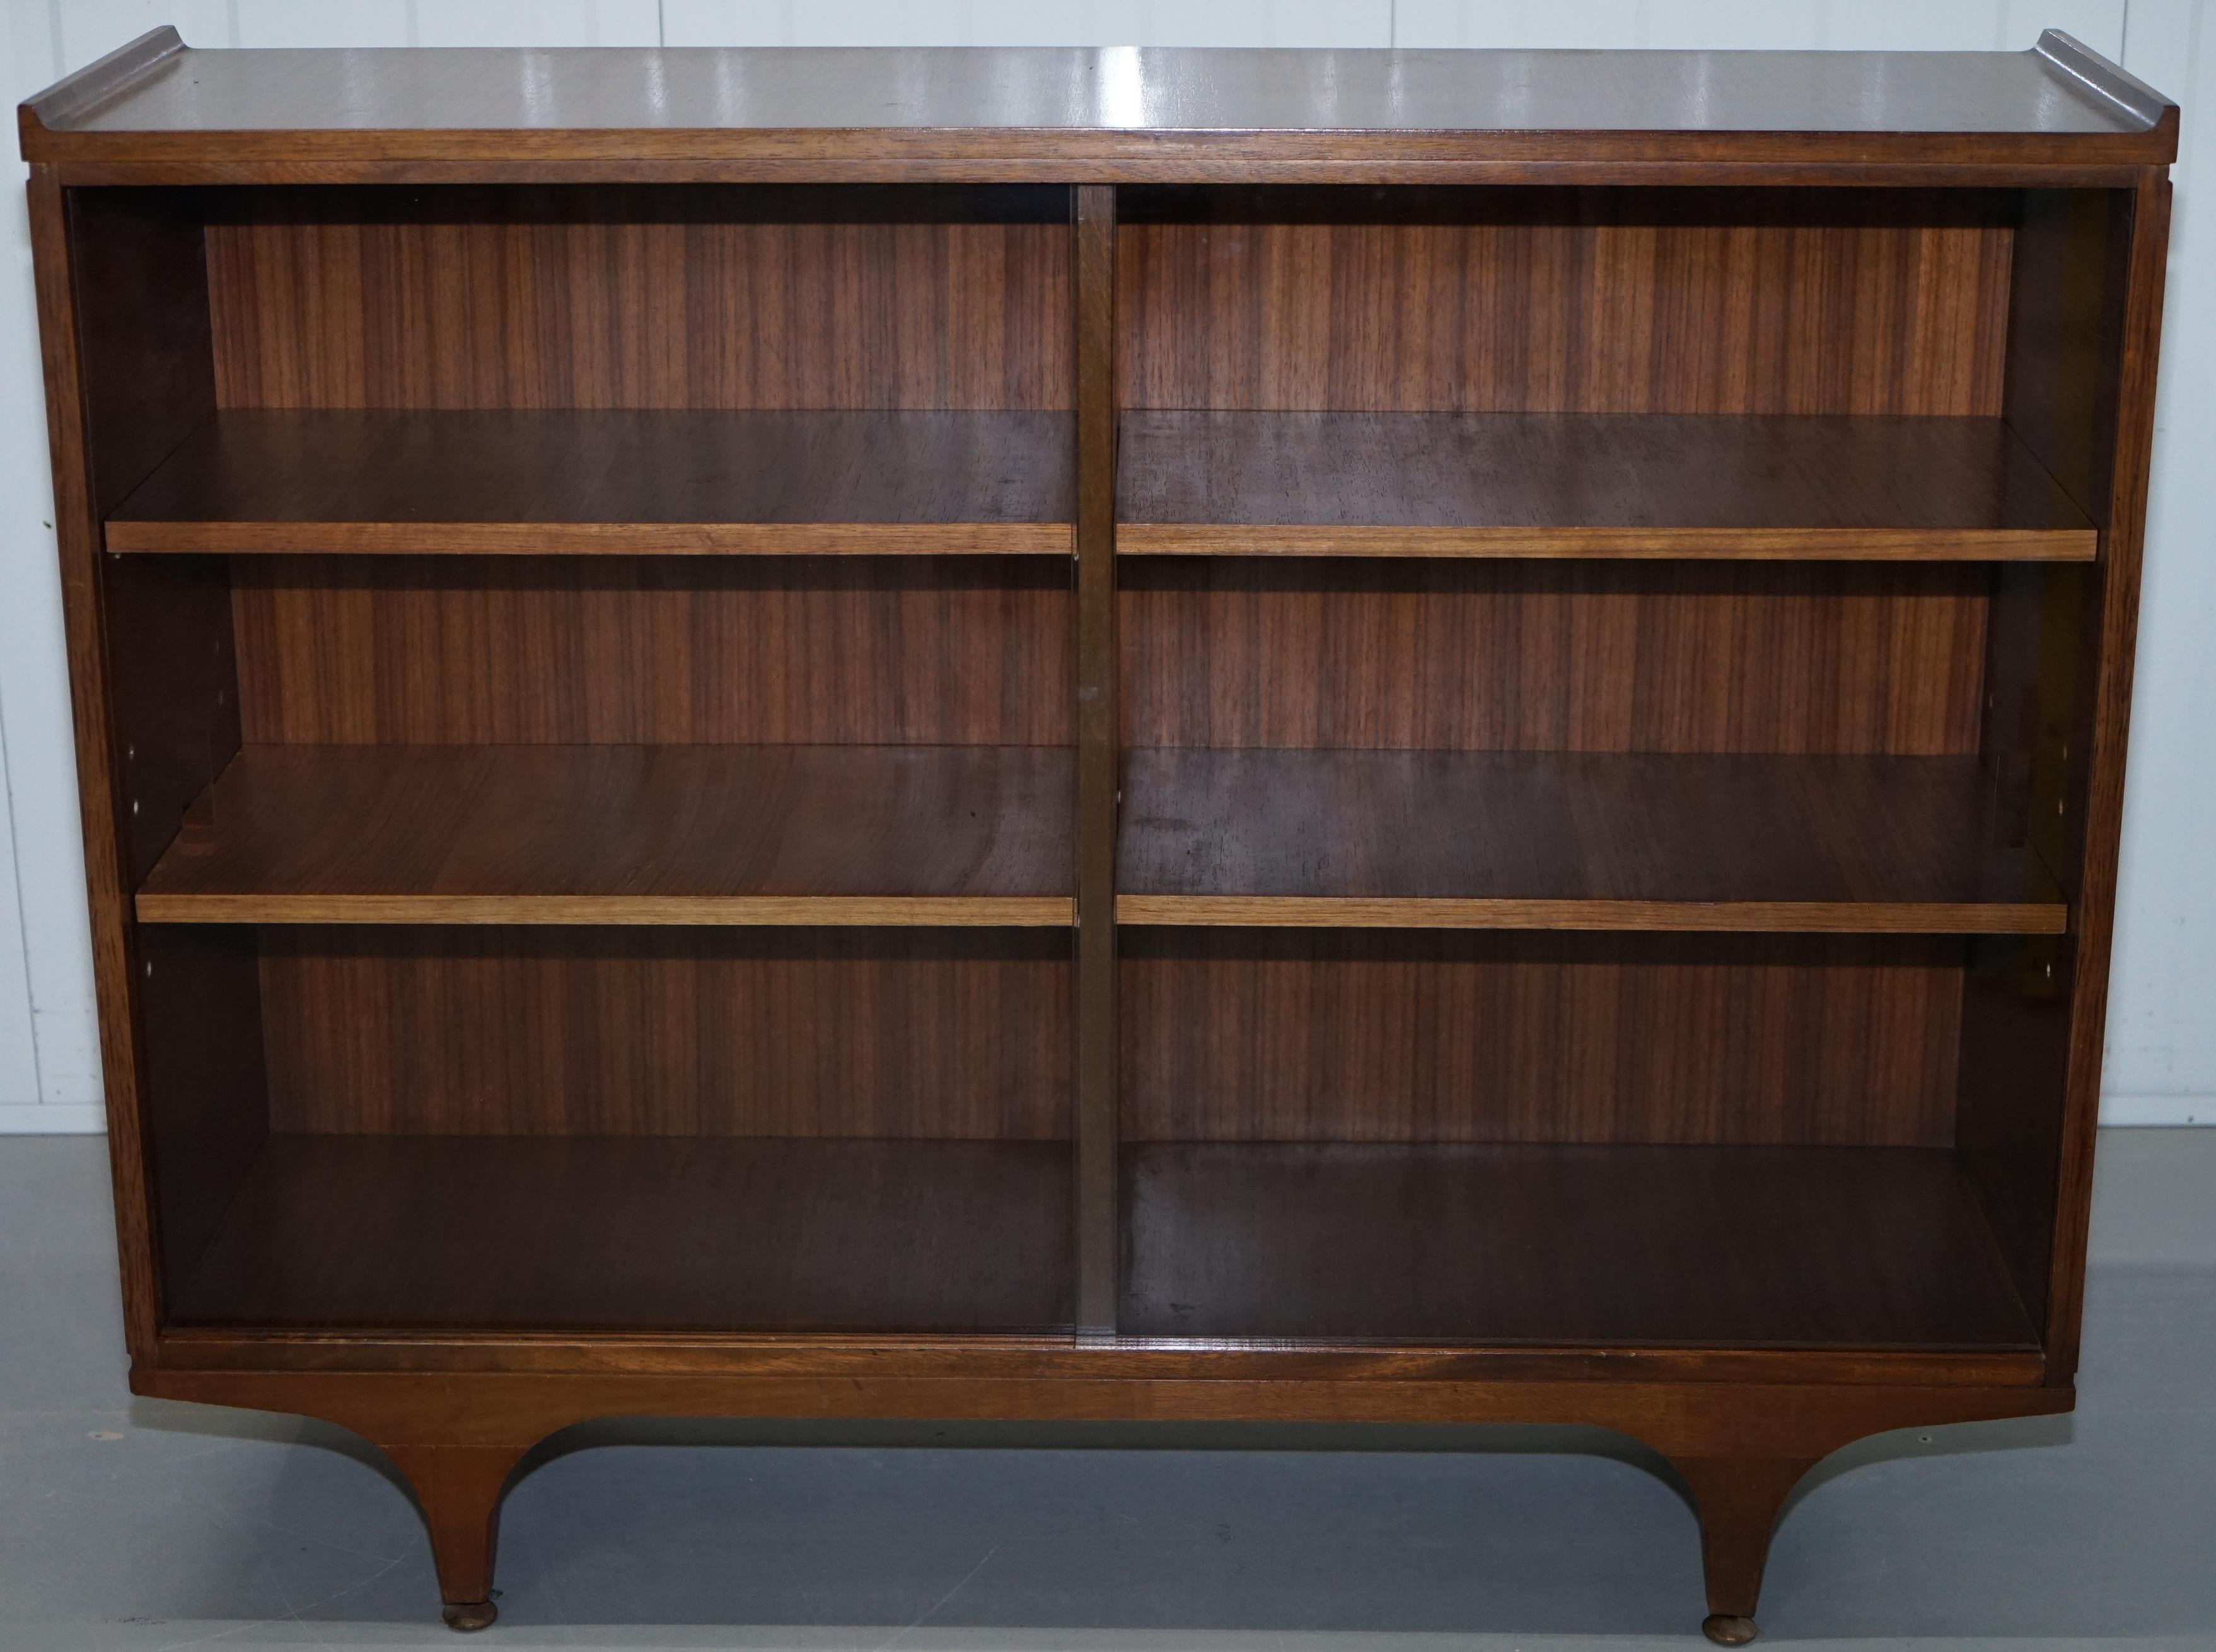 Pair of Sculpted Mid-Century Modern Teak Bookcases with Glass Sliding Doors 1